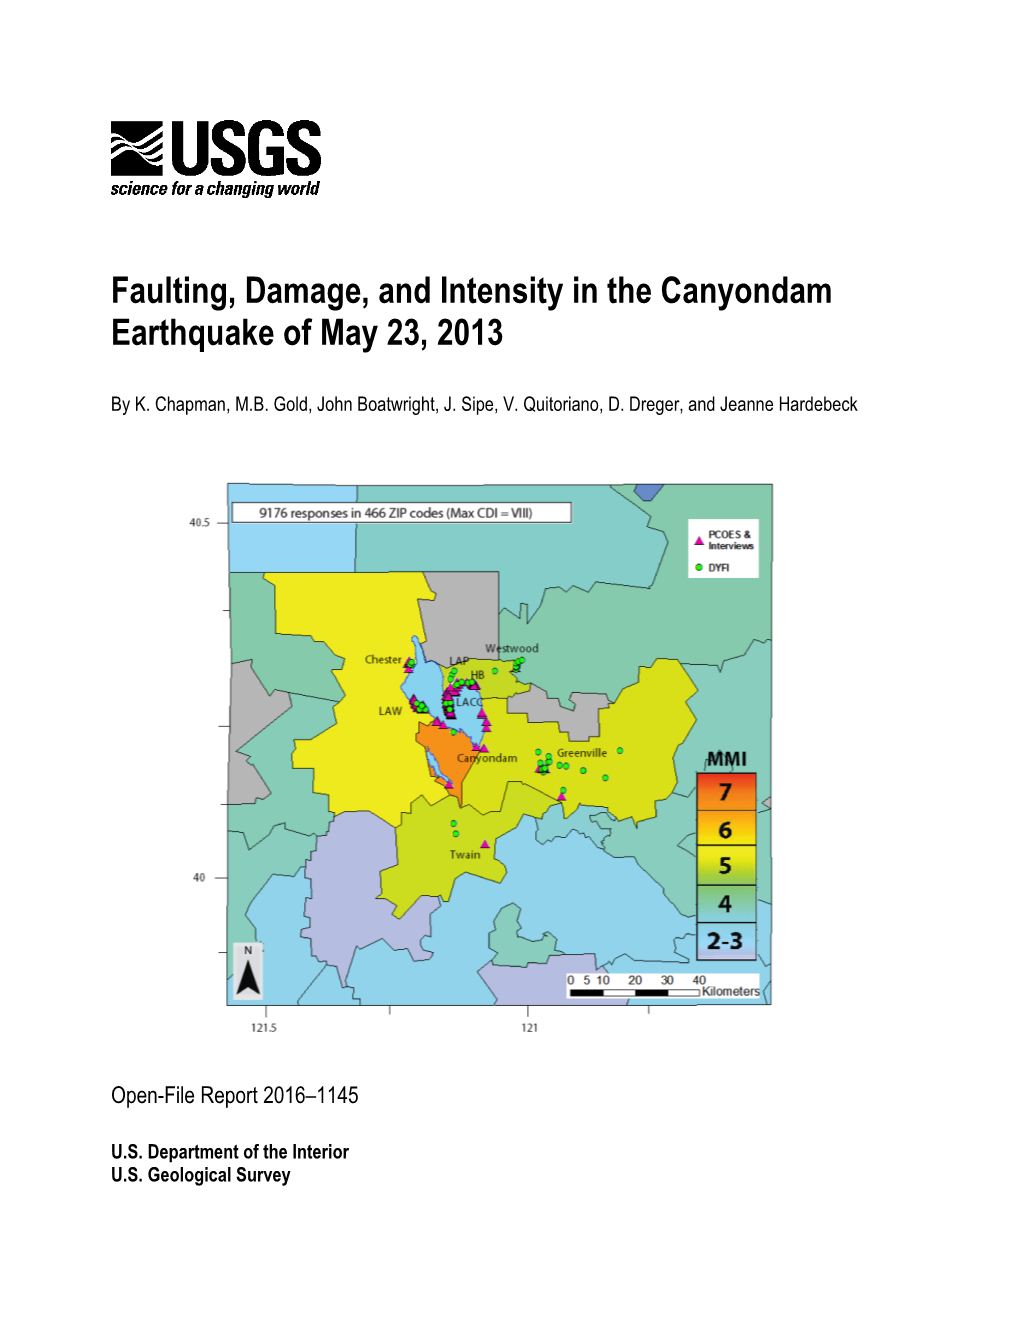 Faulting, Damage, and Intensity in the Canyondam Earthquake of May 23, 2013